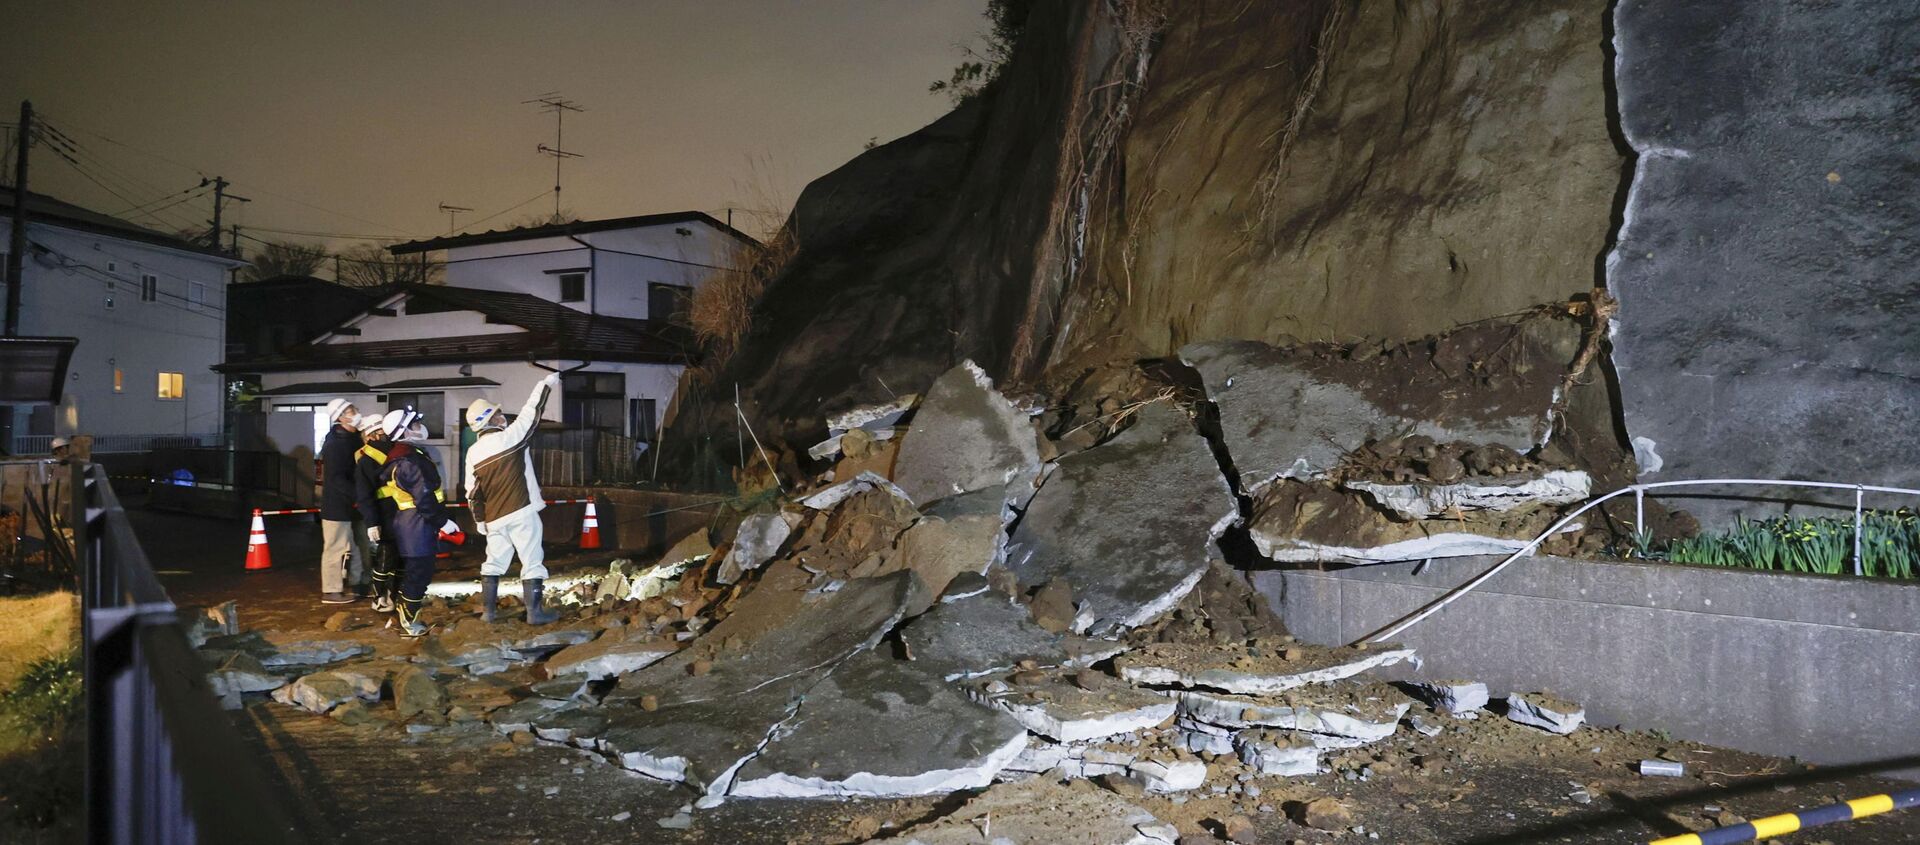 A part of a cliff which collapsed due to an earthquake is pictured in Shiogama, Miyagi prefecture, Japan in this photo taken by Kyodo on March 20, 2021. - Sputnik International, 1920, 28.03.2021